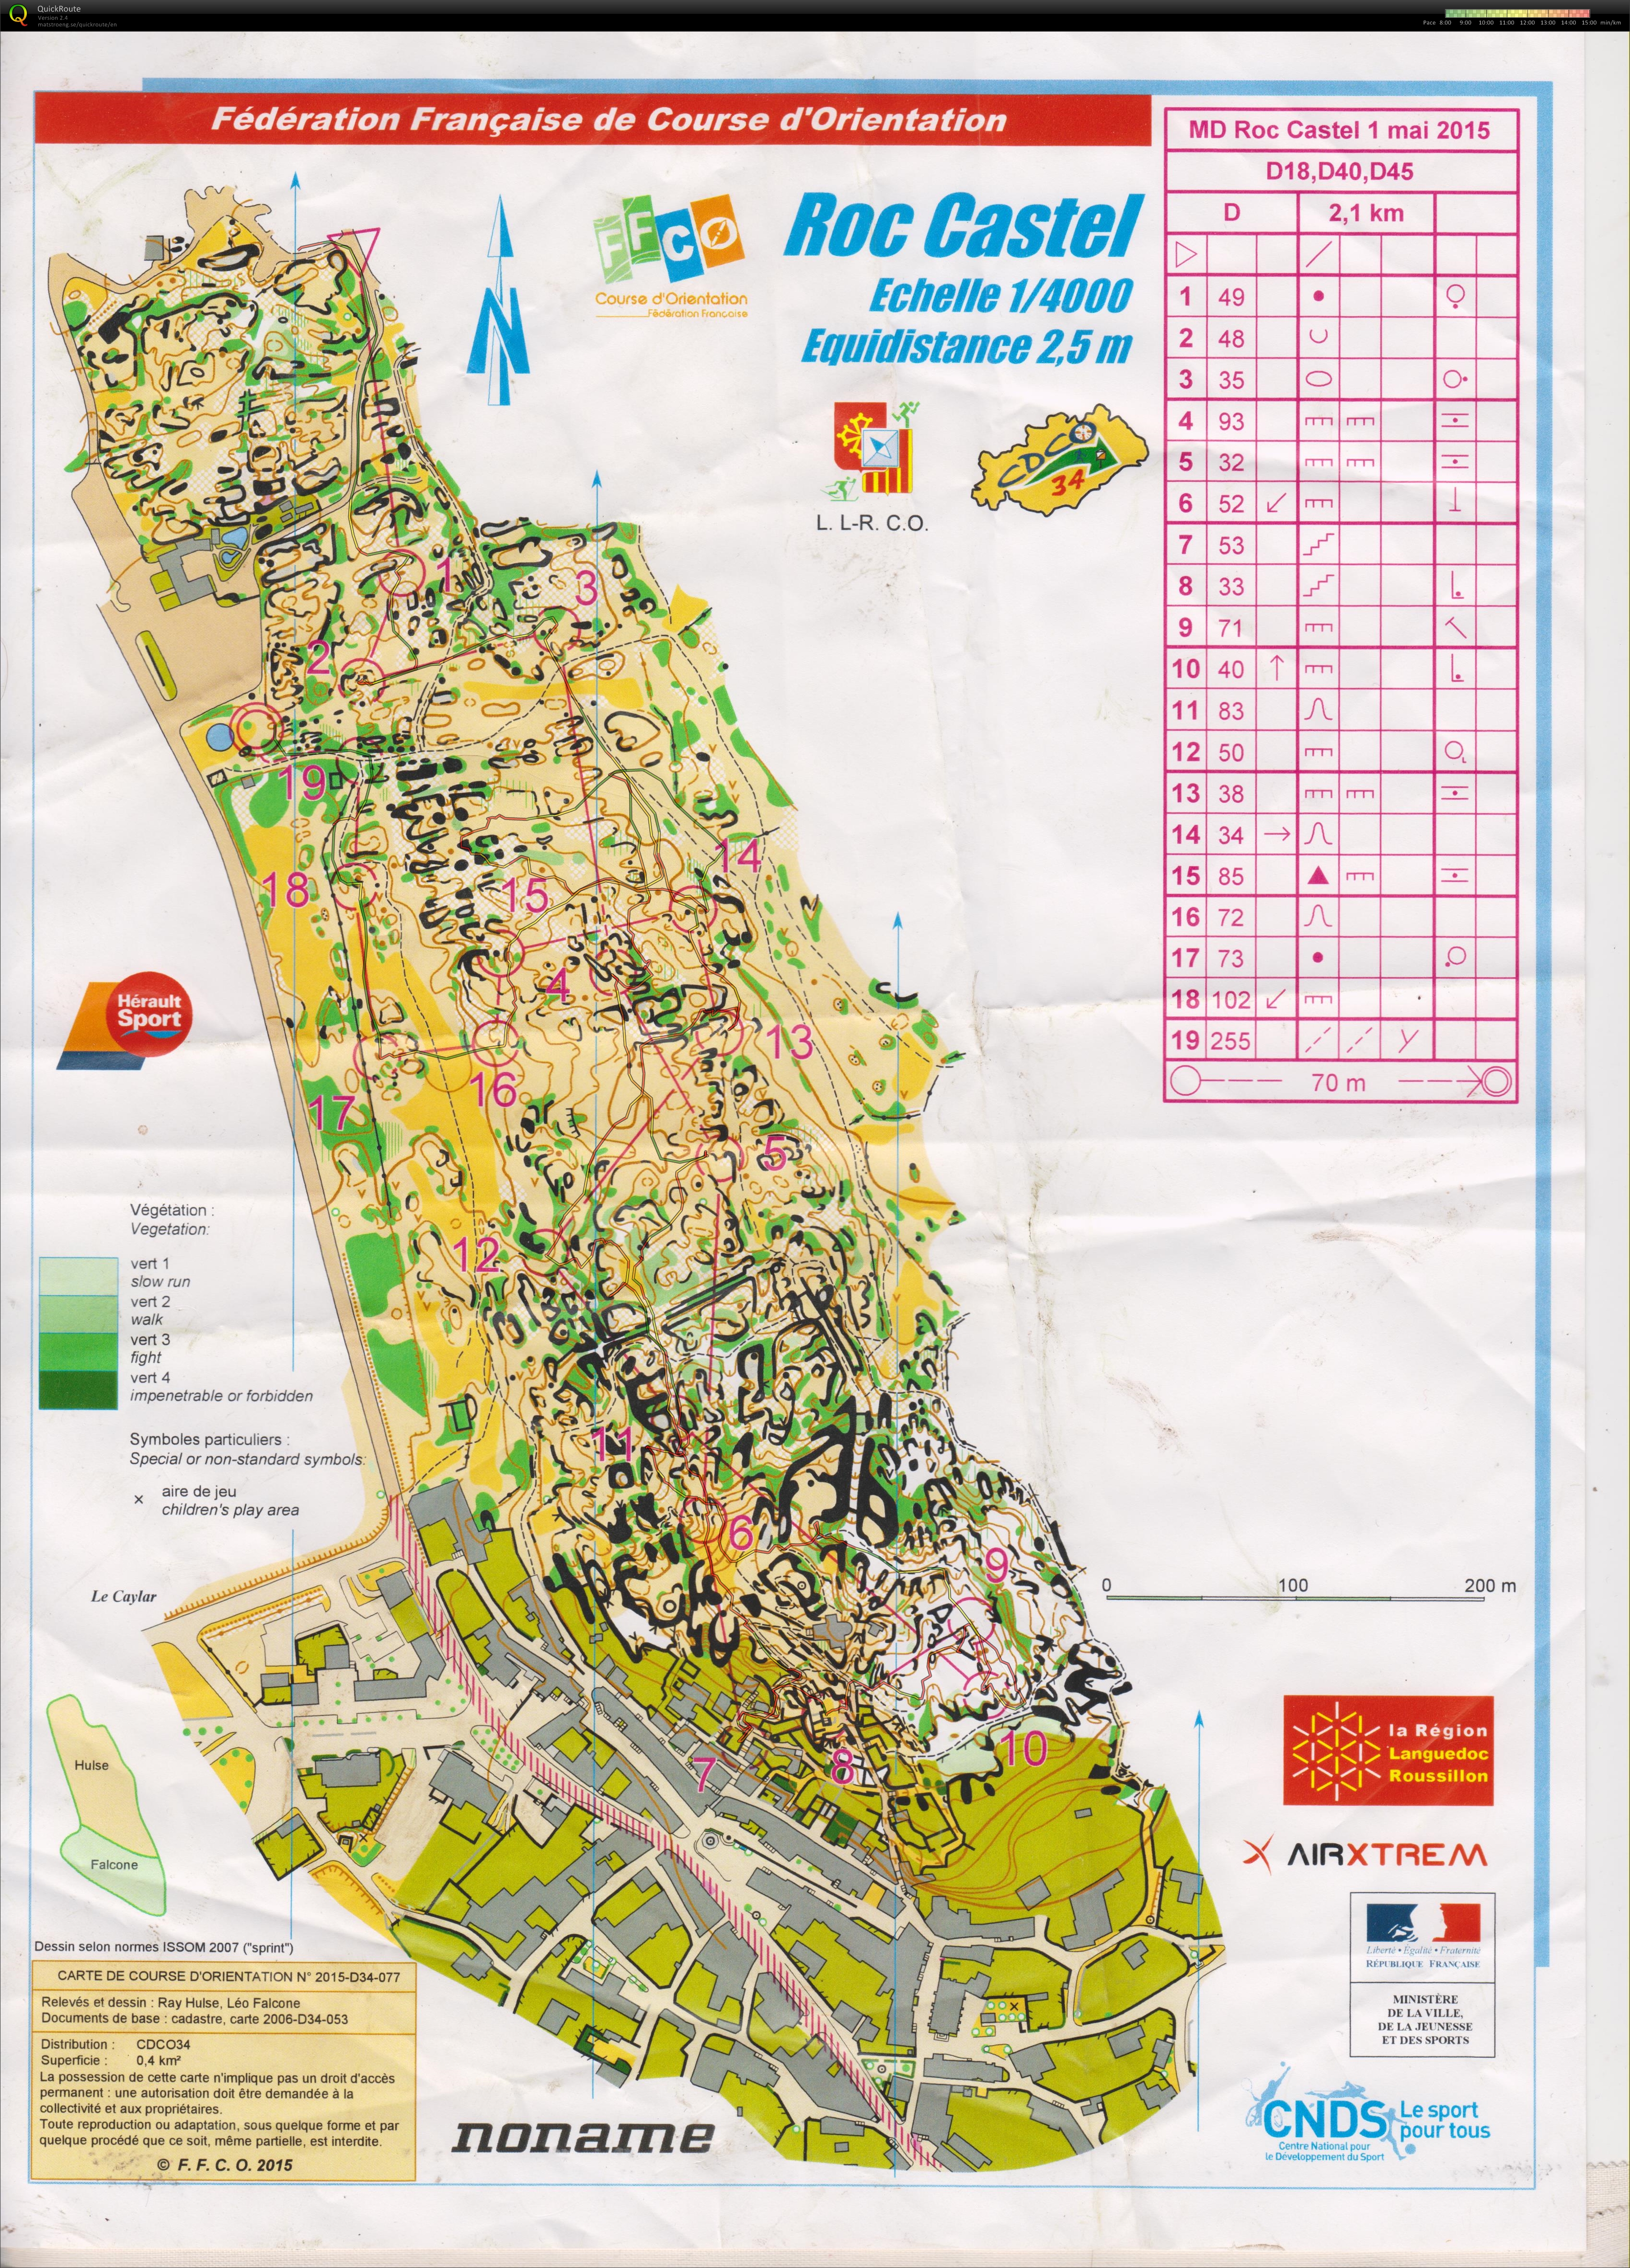 Nationale SO Larzac D18 - Day 1 - Le Caylar (01/05/2015)